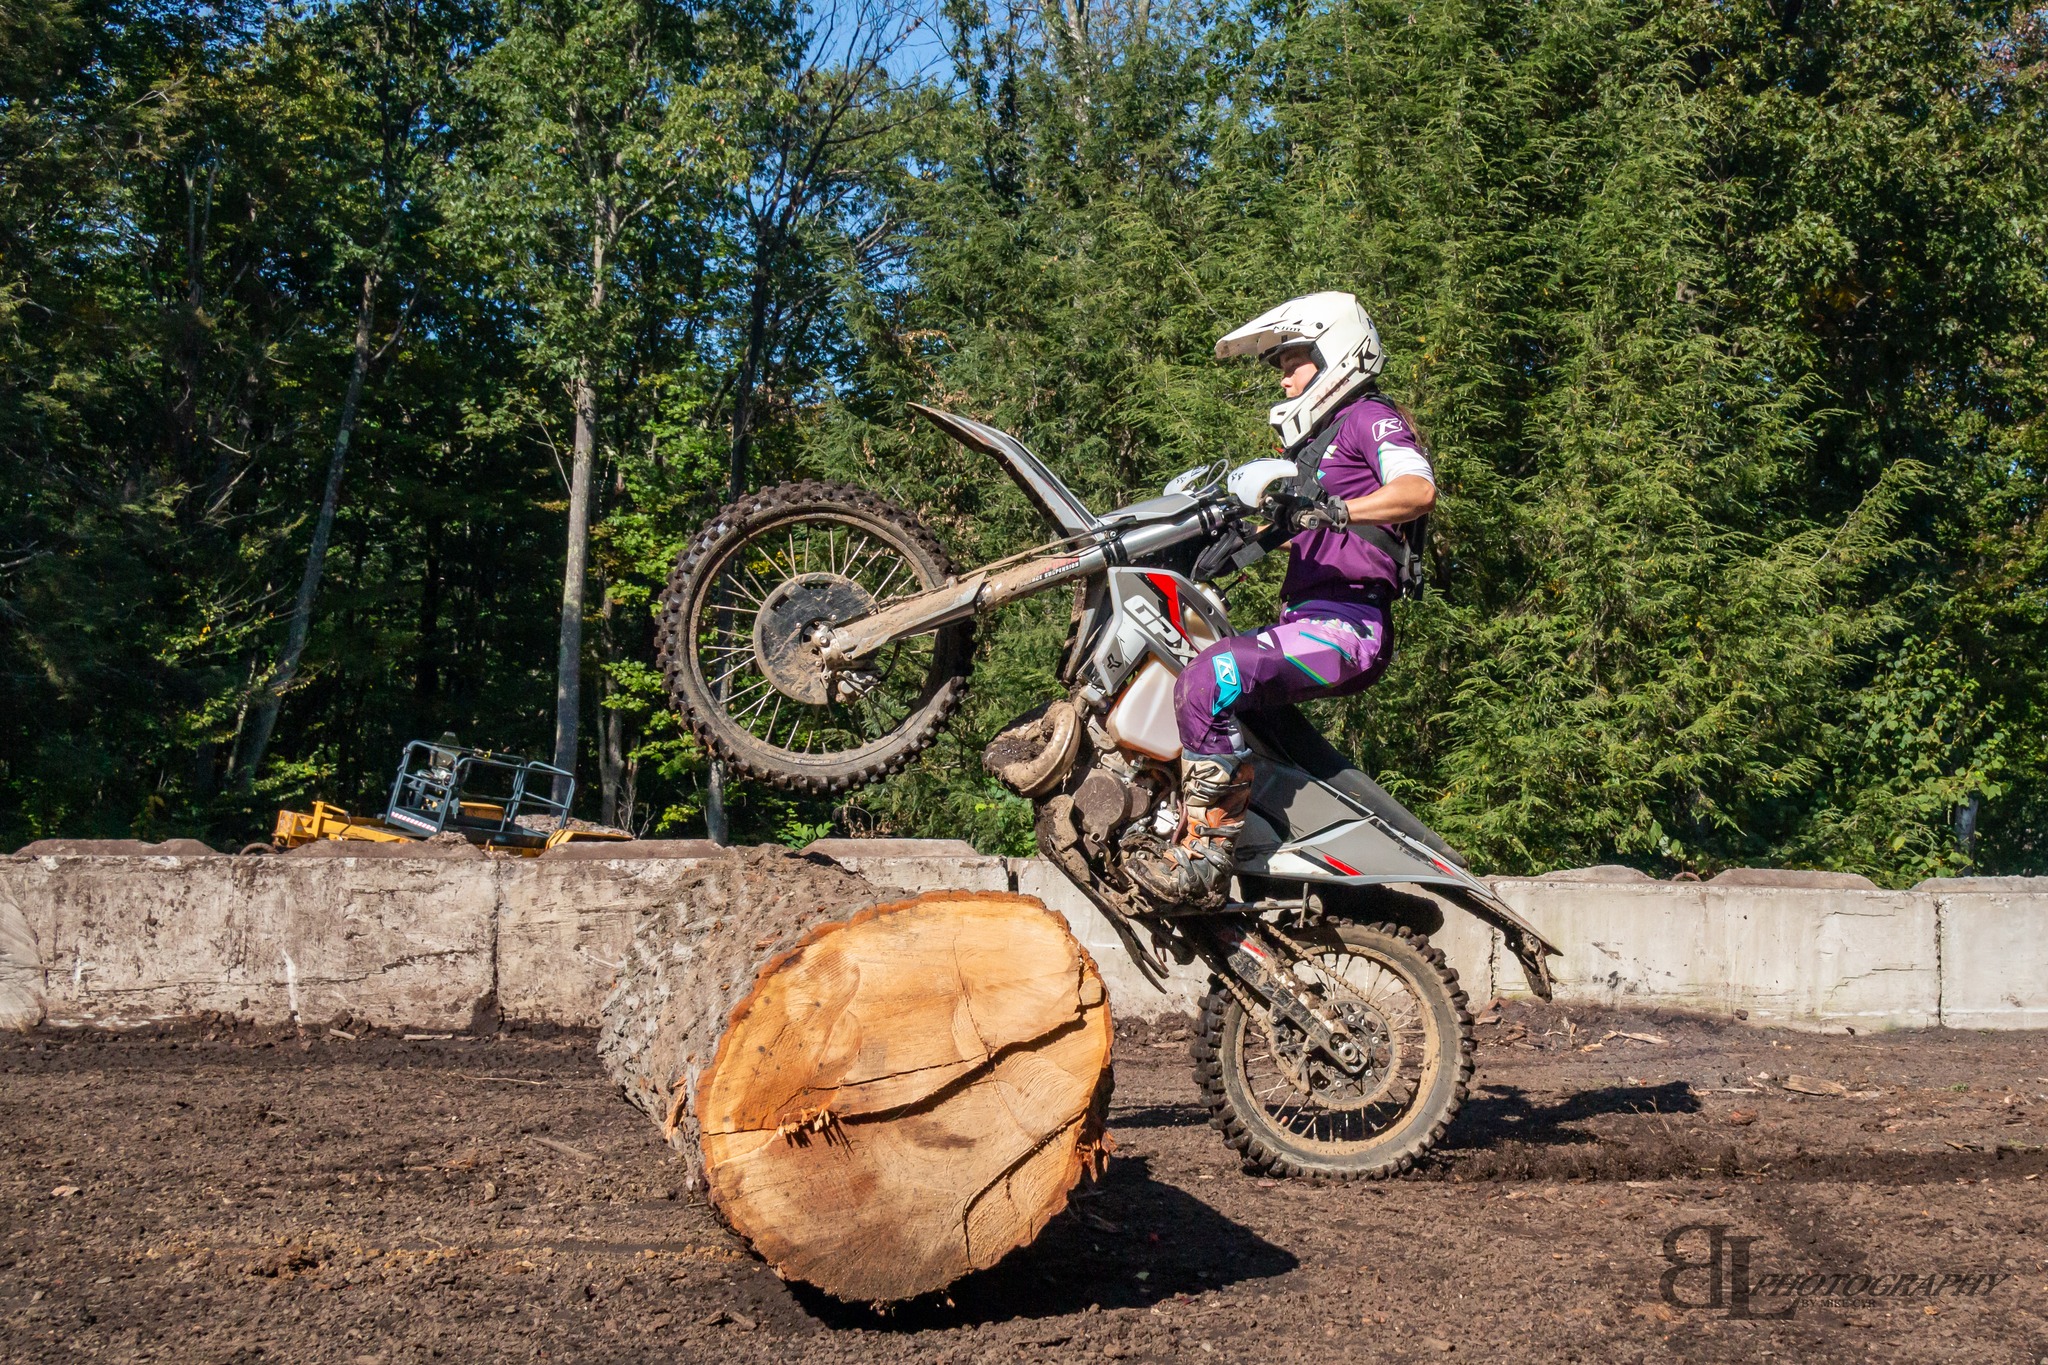 Megs riding over a large log